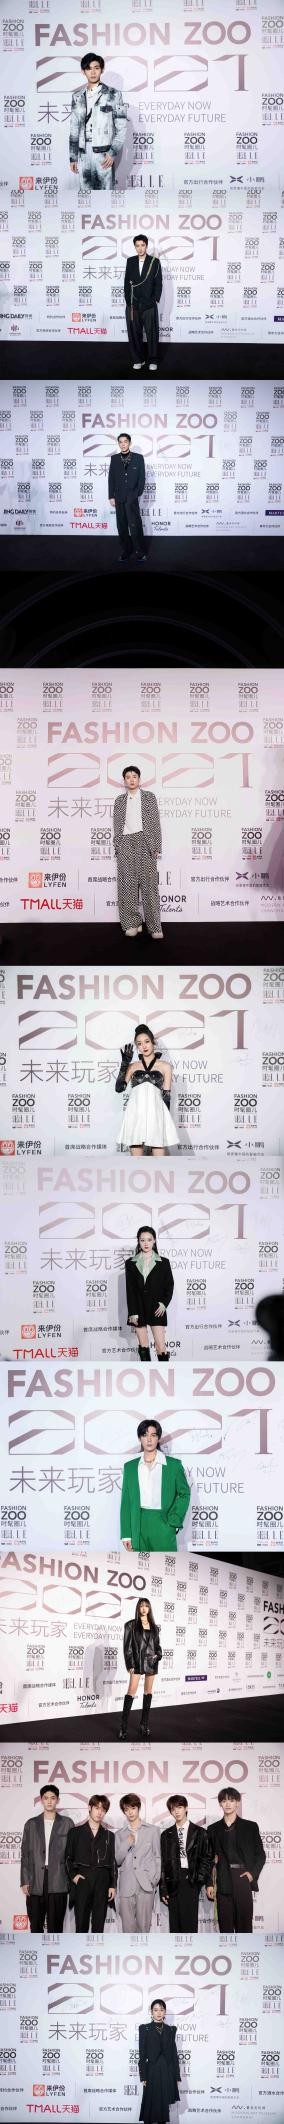 FASHION ZOO 2021 is officially opened. Feel the power of design and fashion